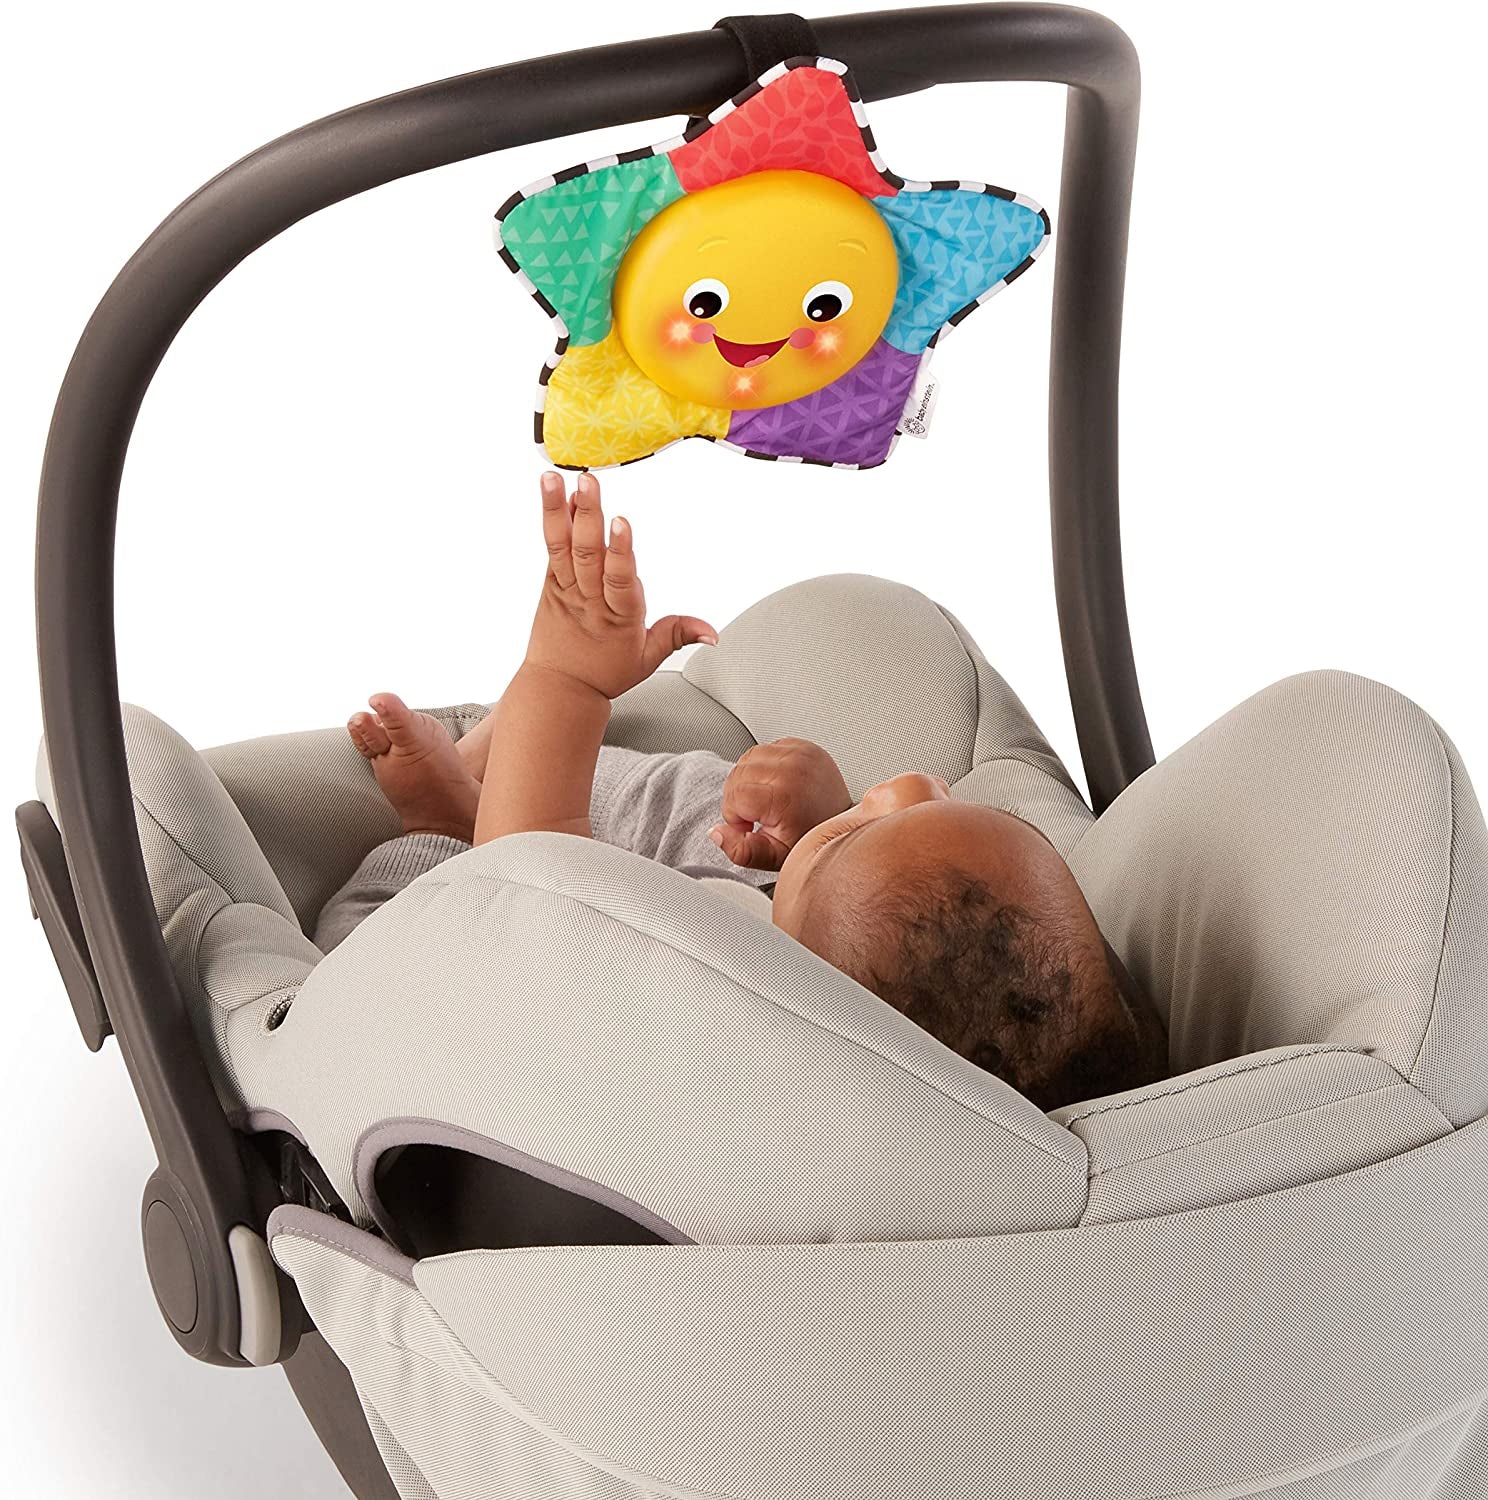 Baby Einstein, Star Bright Symphony Plush Musical Take-Along Toy with 20 Melodies & Light, Clip on Pram, Pushchair or Car Seat, Soothing High Contrast Sensory Toy, Ages Newborn +